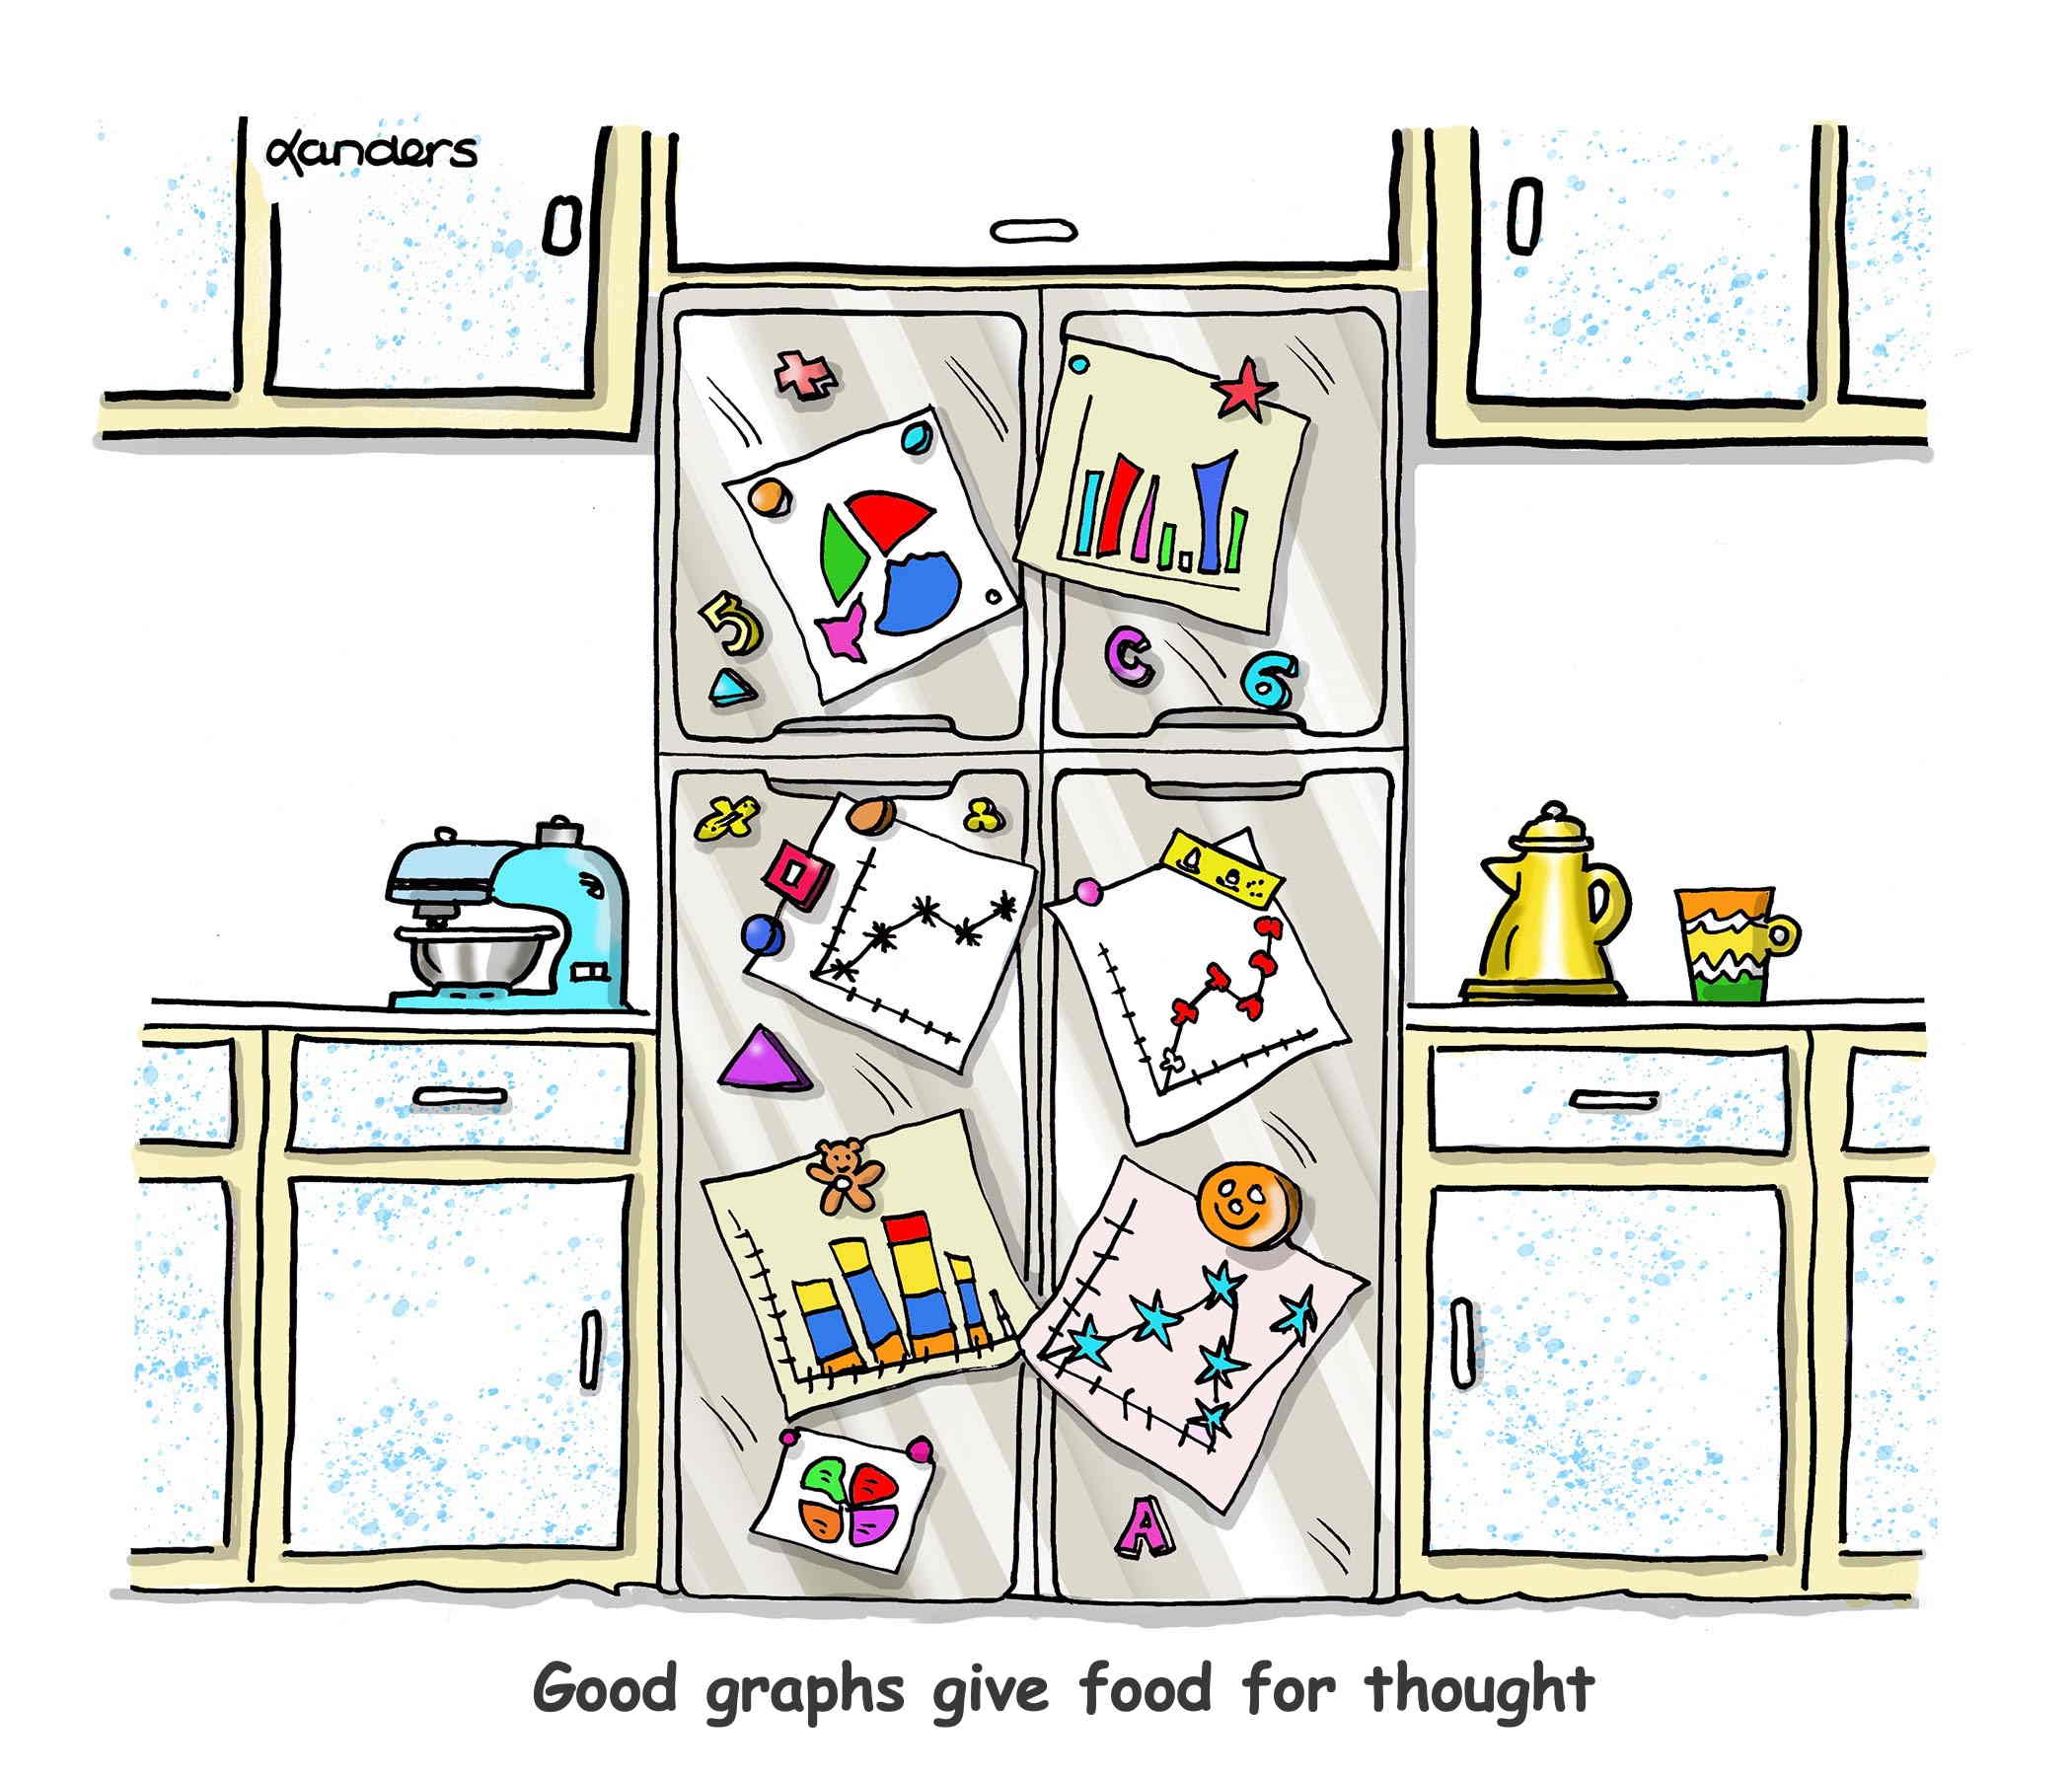 Cartoon with magnets holding graphs instead of child's art. Caption says: Good graphs give food for thought